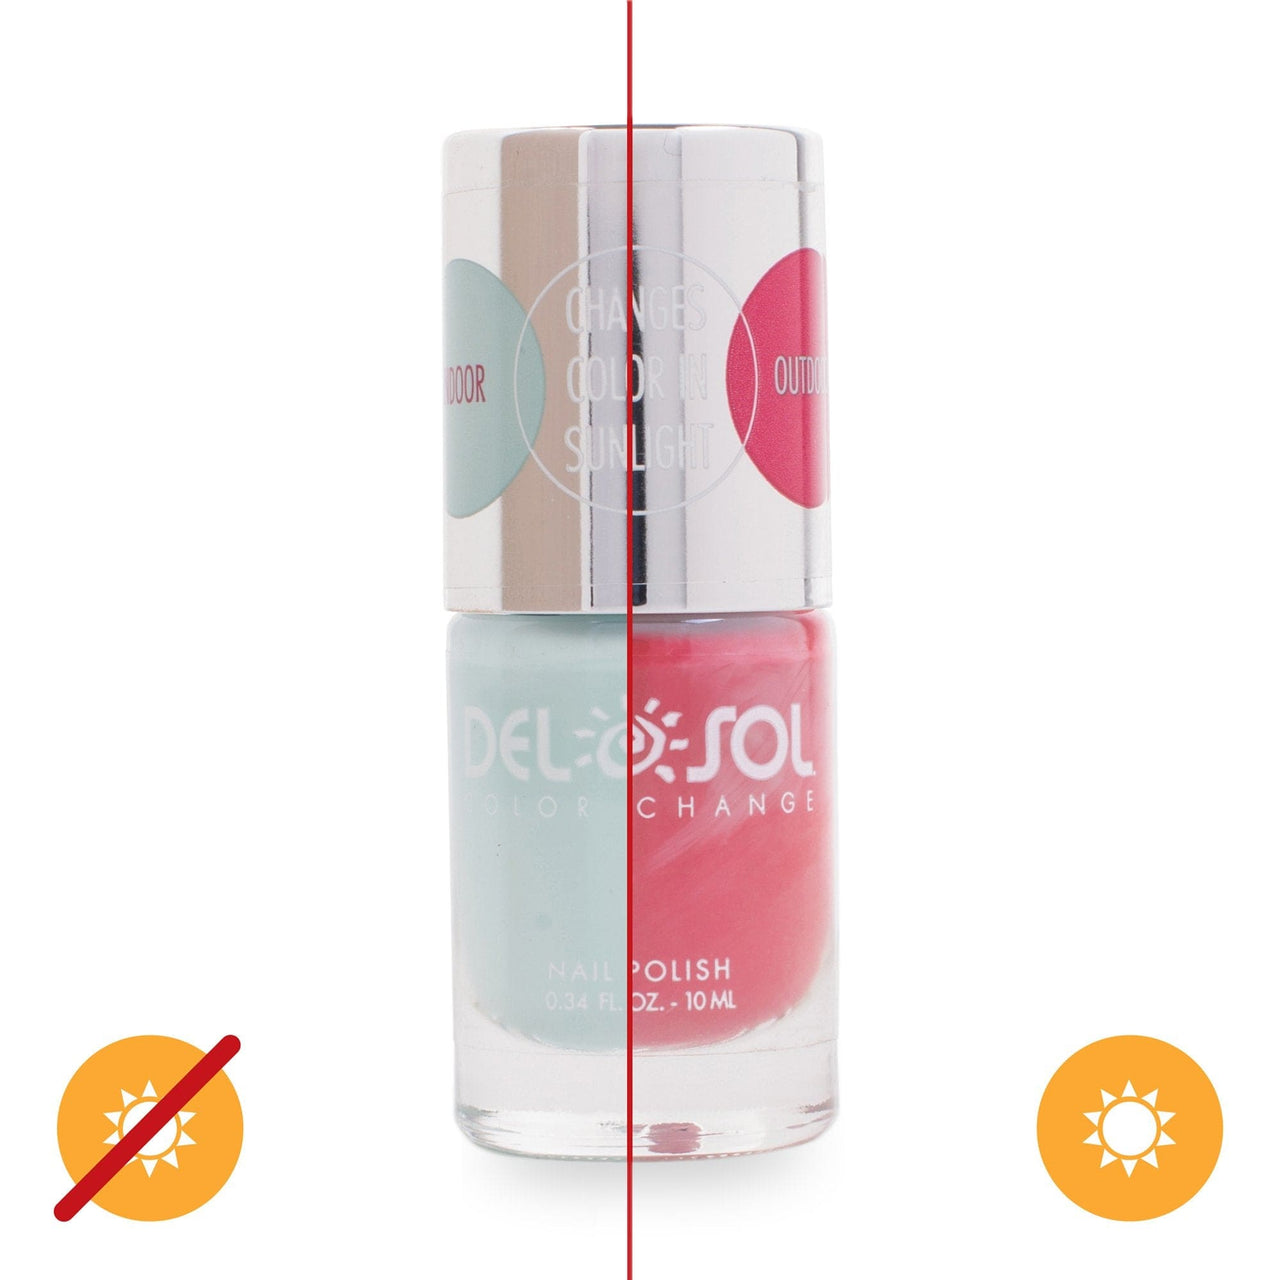 Del Sol Changing Nail Polish- Thistle Be the Day